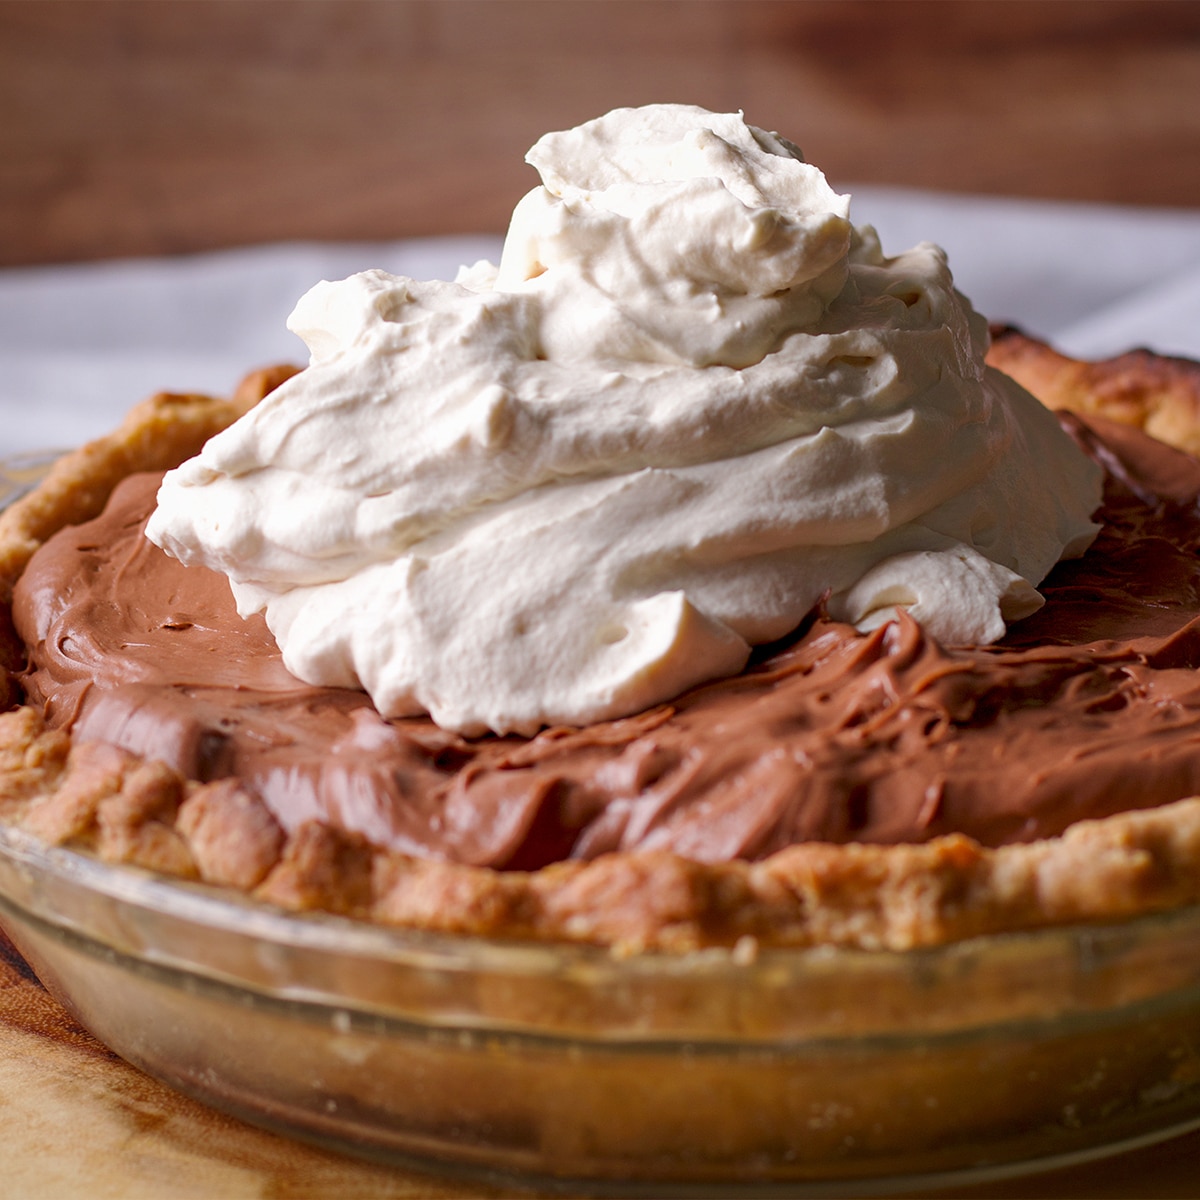 A chocolate cream pie that's just been topped with whipped cream.